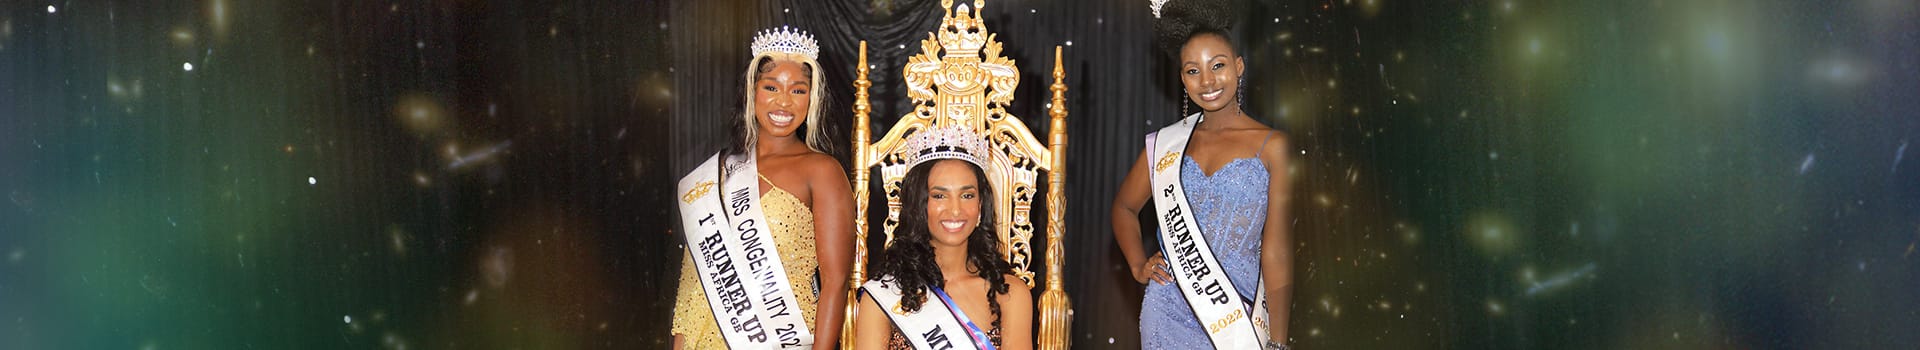 Miss Africa Great Britain songs and videos - CEEK.com